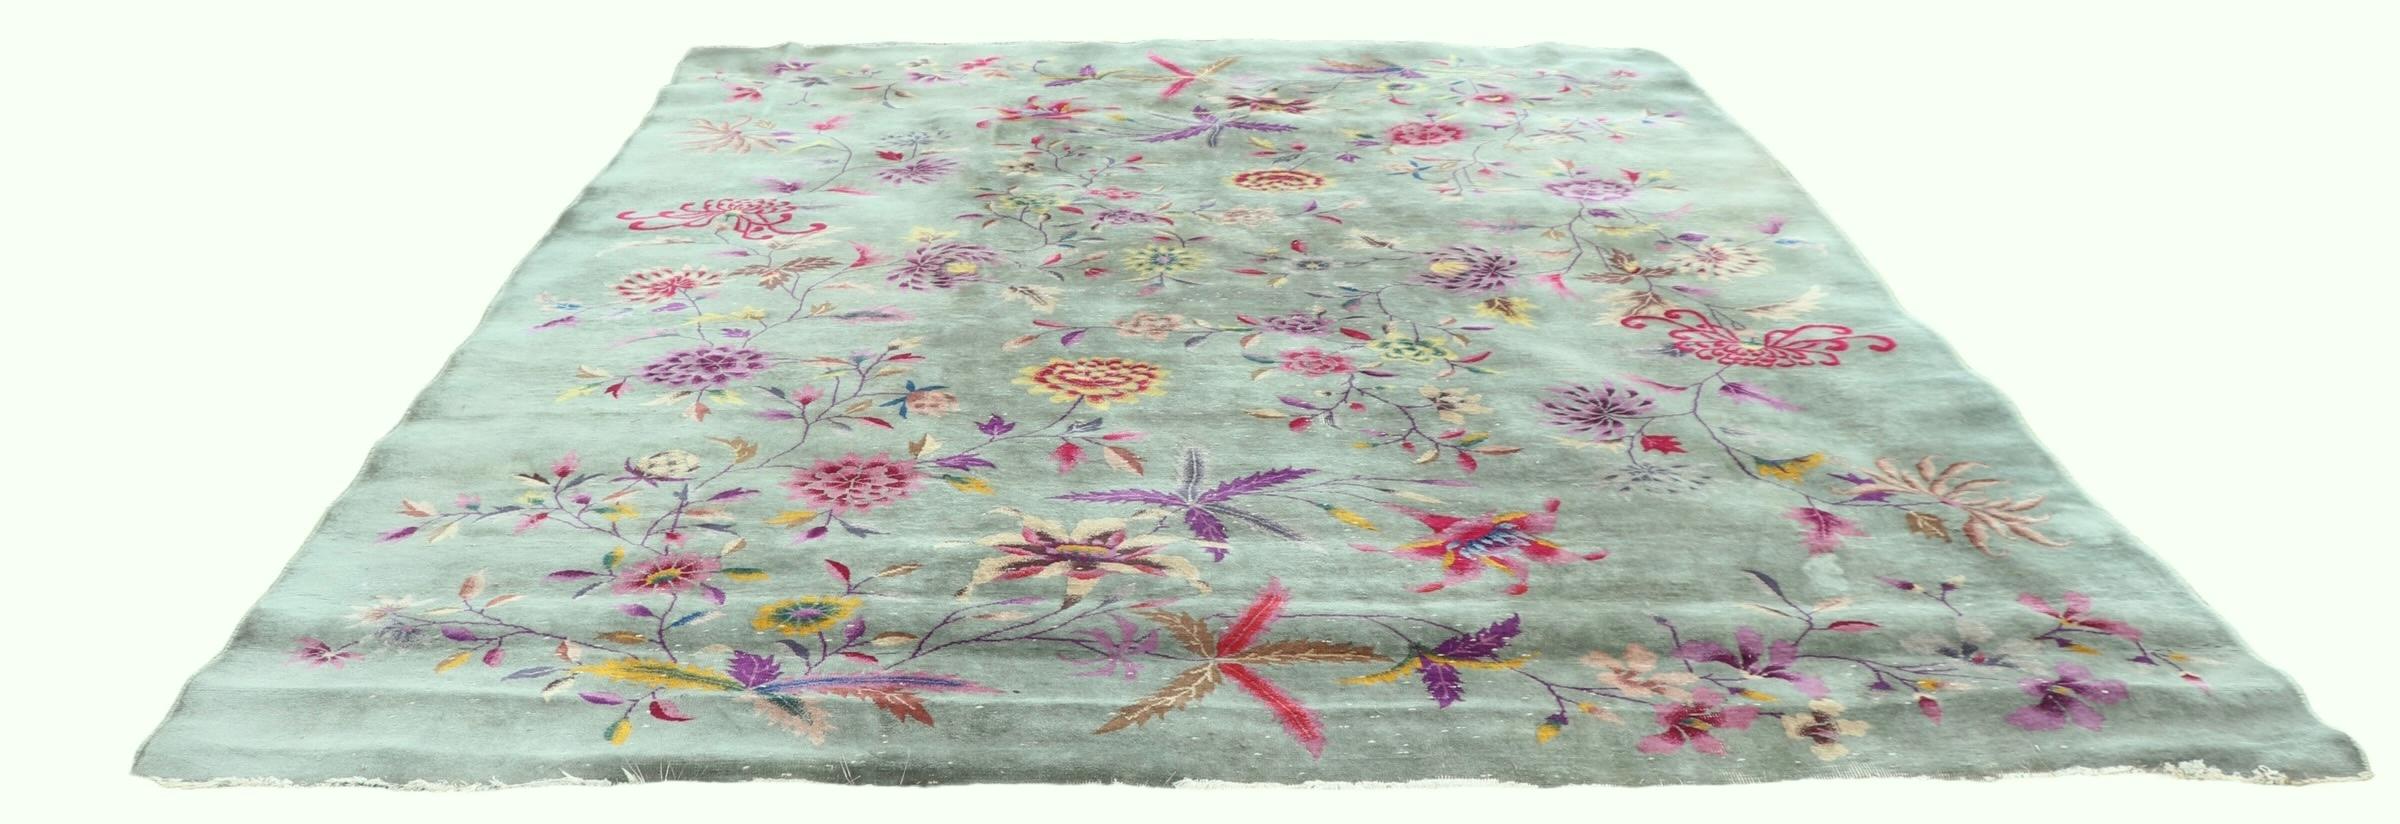 Art Deco Chinese Rug with Floral Motif c. 1920/1930's For Sale 6